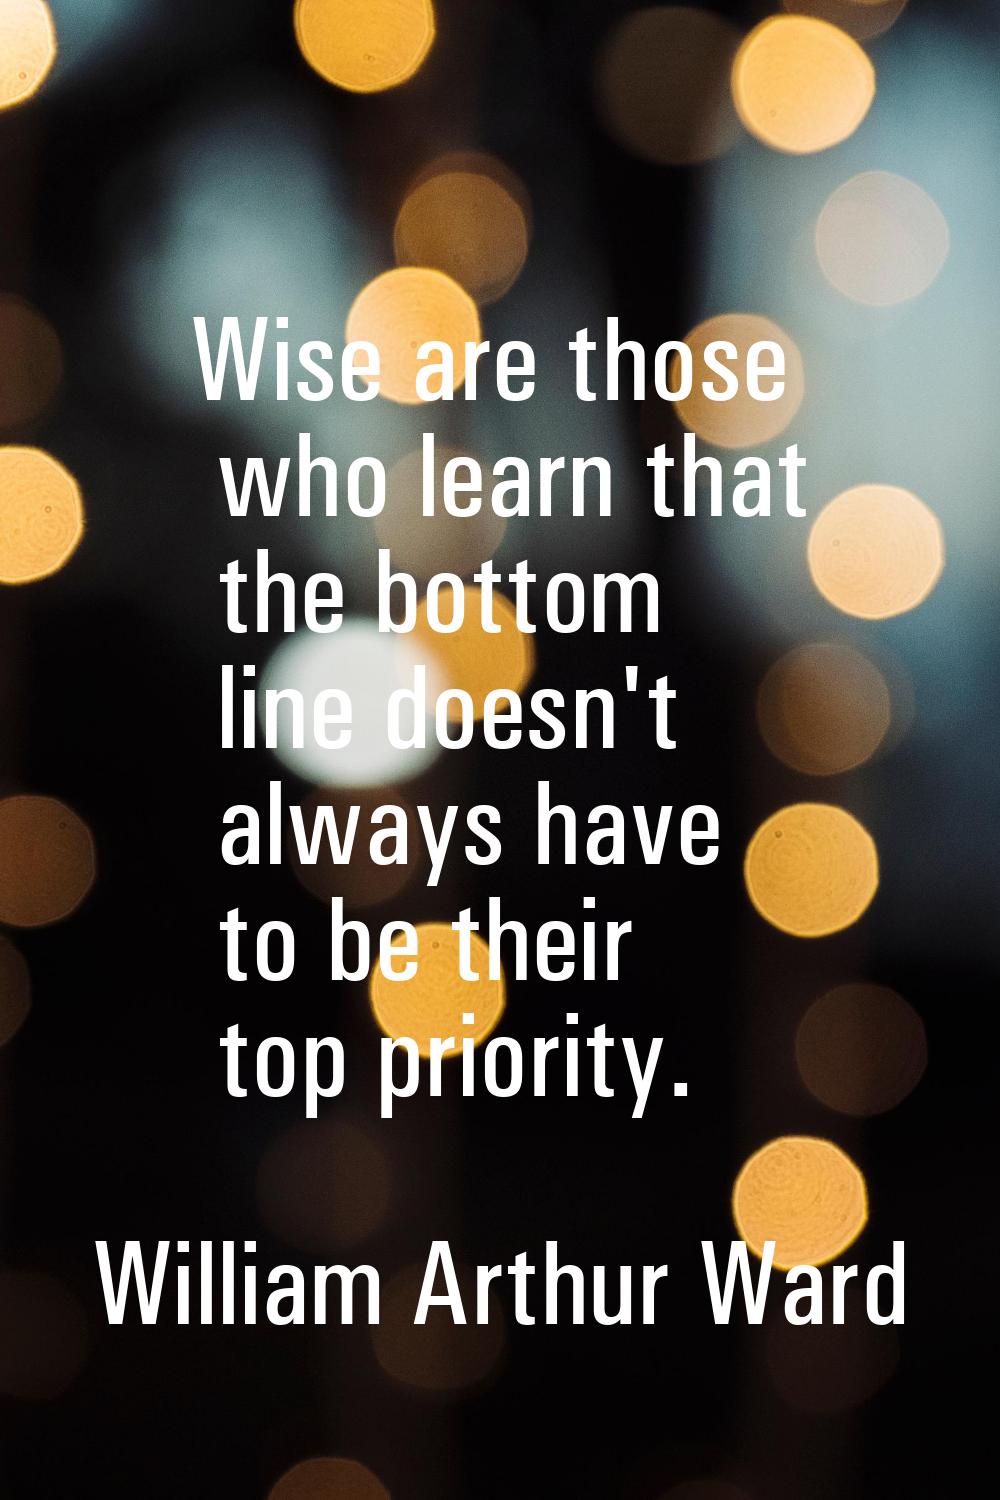 Wise are those who learn that the bottom line doesn't always have to be their top priority.